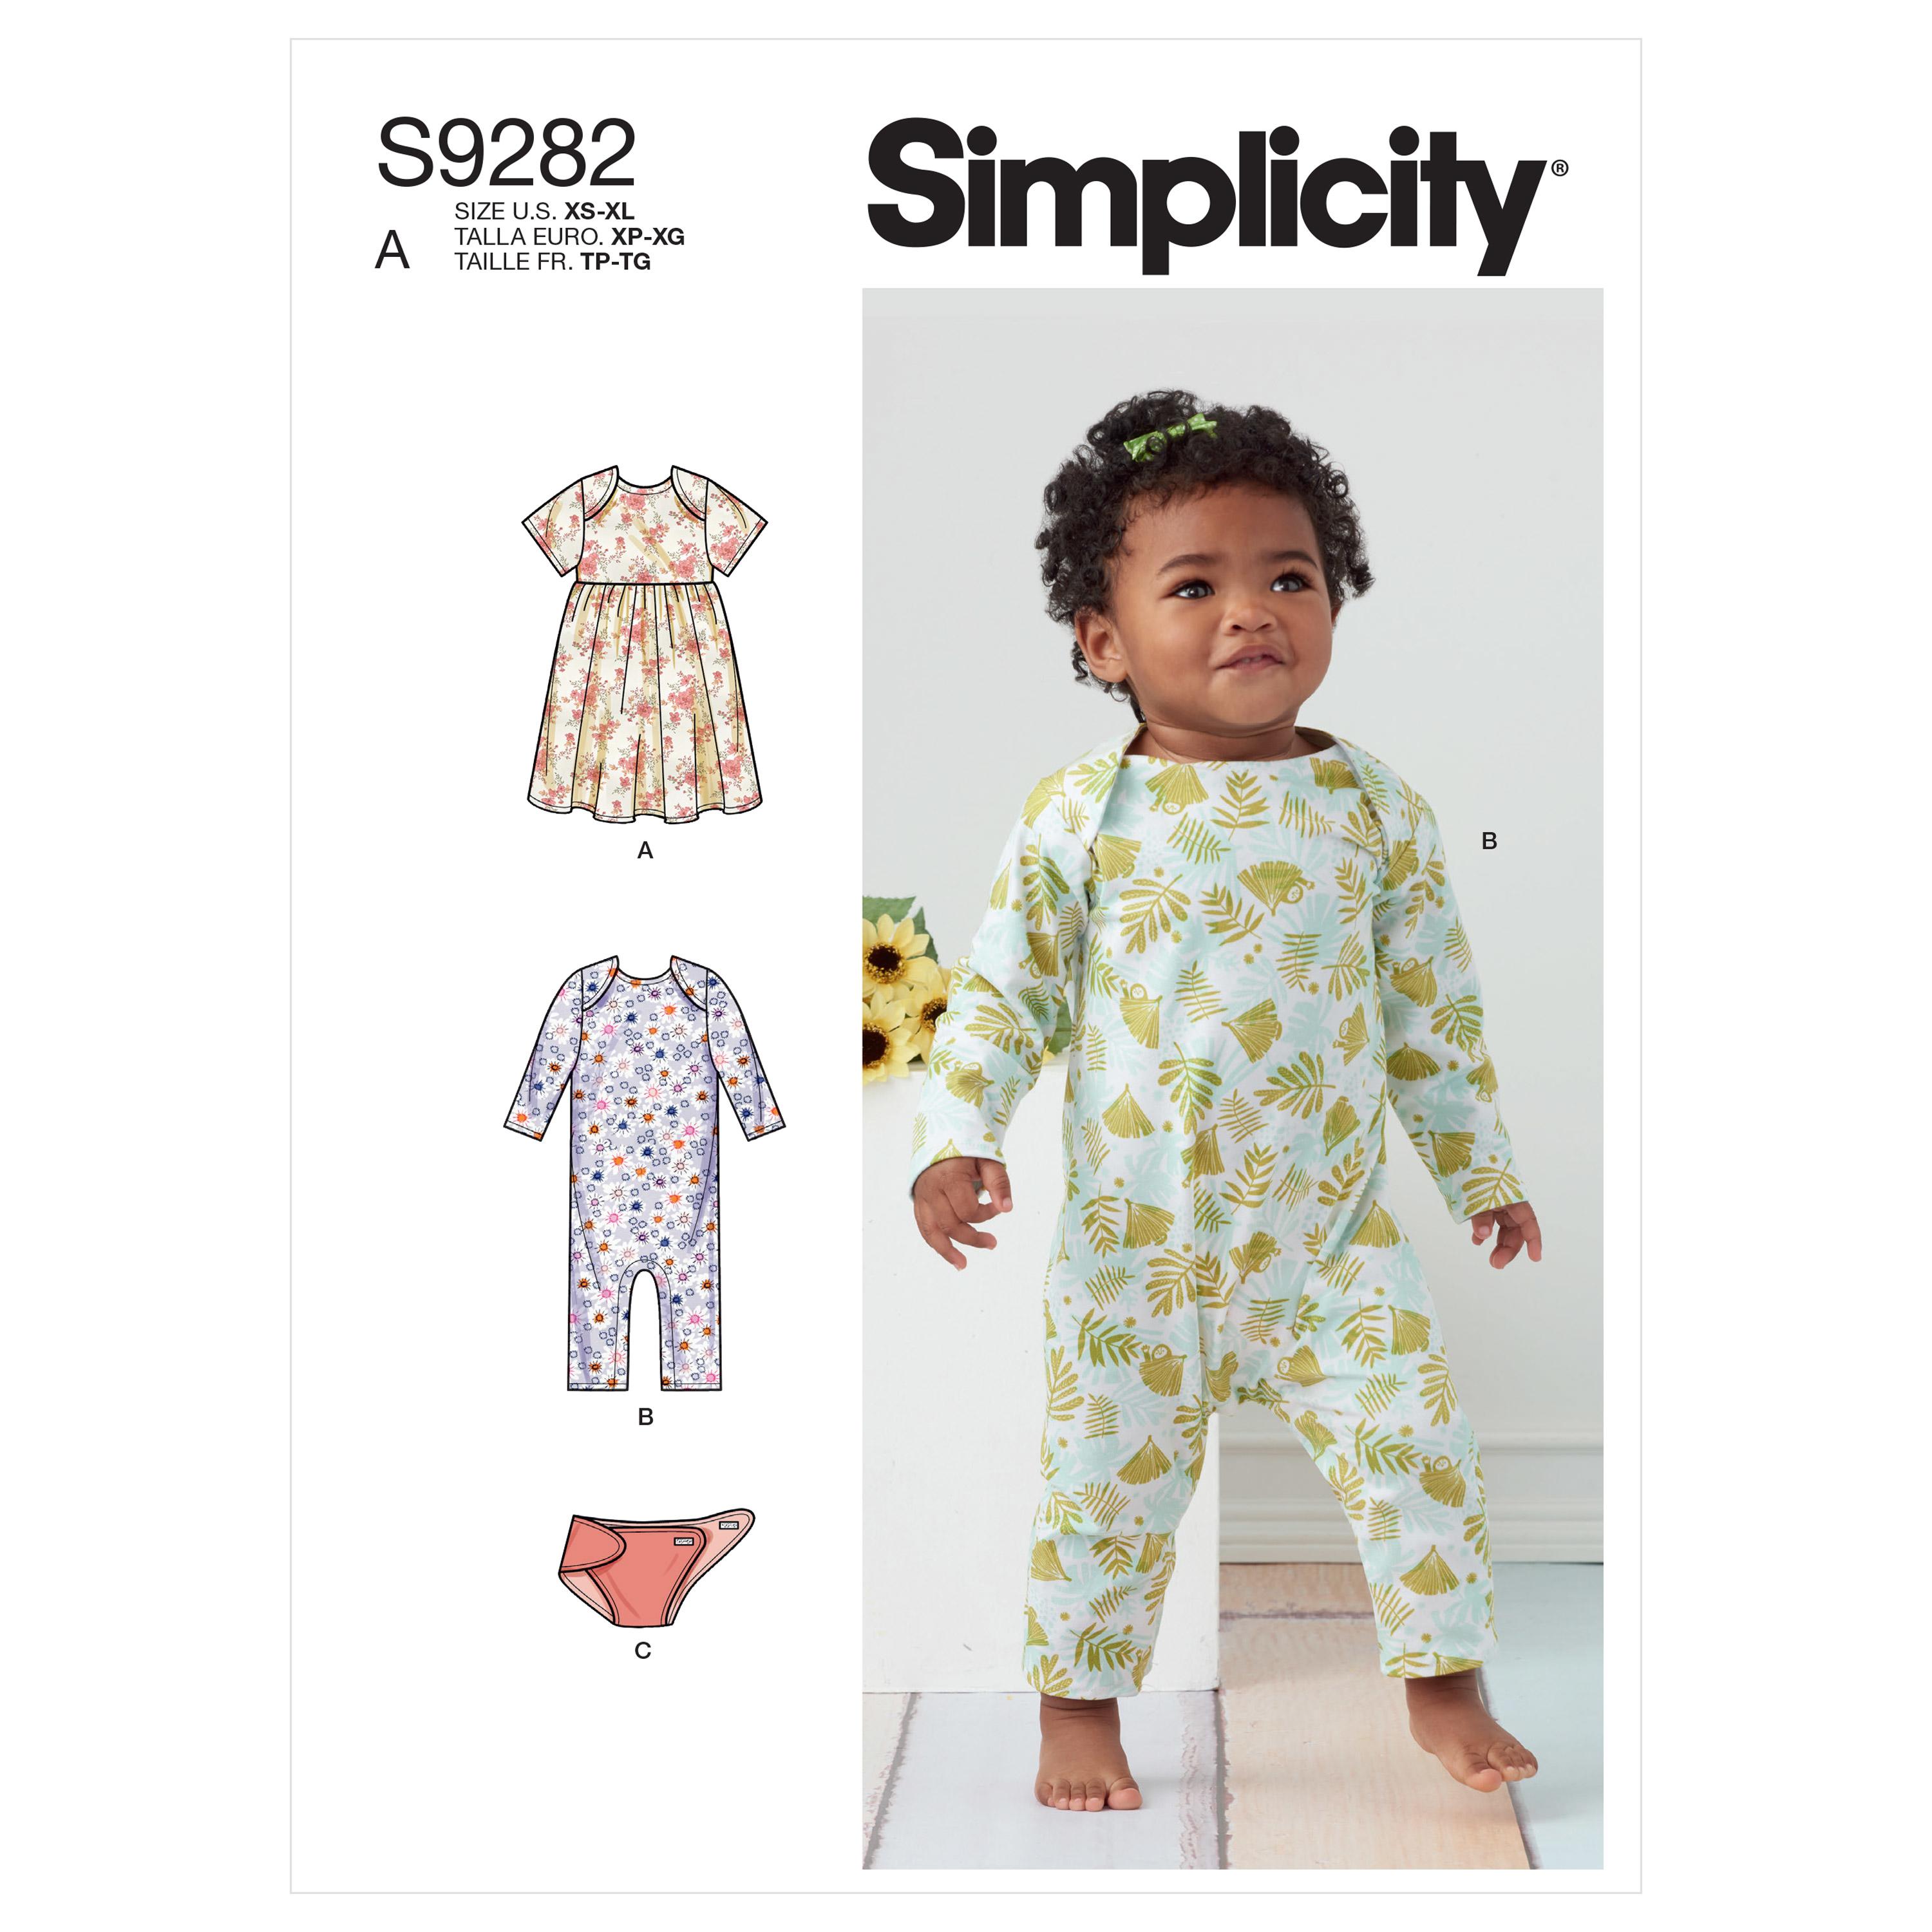 Simplicity Sewing Pattern S9282 Babies' Knit Dress, Romper & Diaper Cover